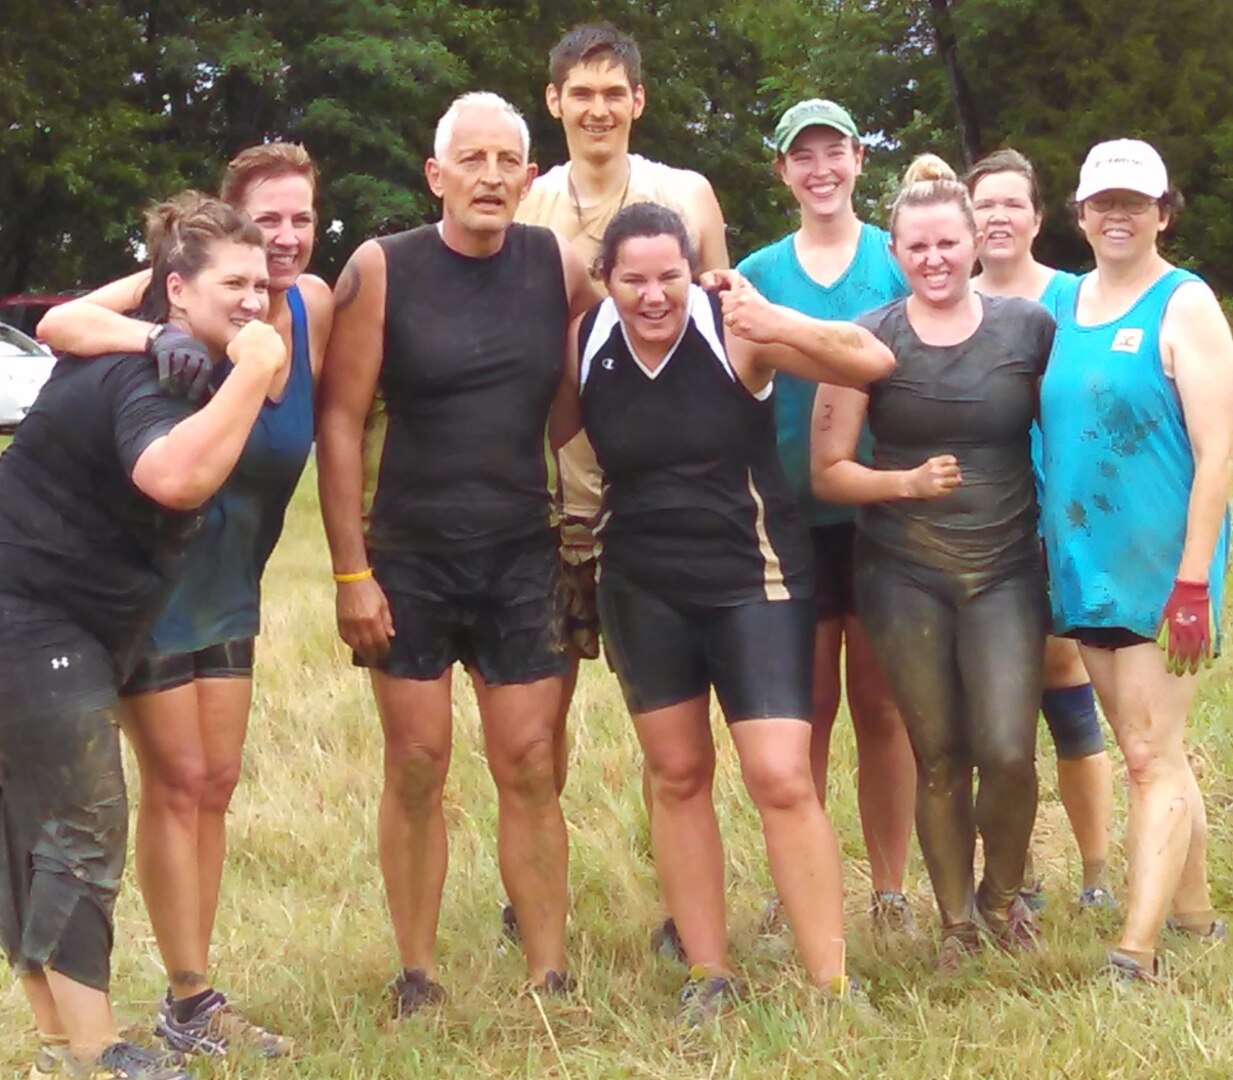 Naval Surface Warfare Center Dahlgren Division (NSWCDD) Systems Safety Engineering Division personnel - known as the "Mud Crazy G70 Team" - ran a challenging four mile-long obstacle course, raising funds for local children, families and residents June 27.